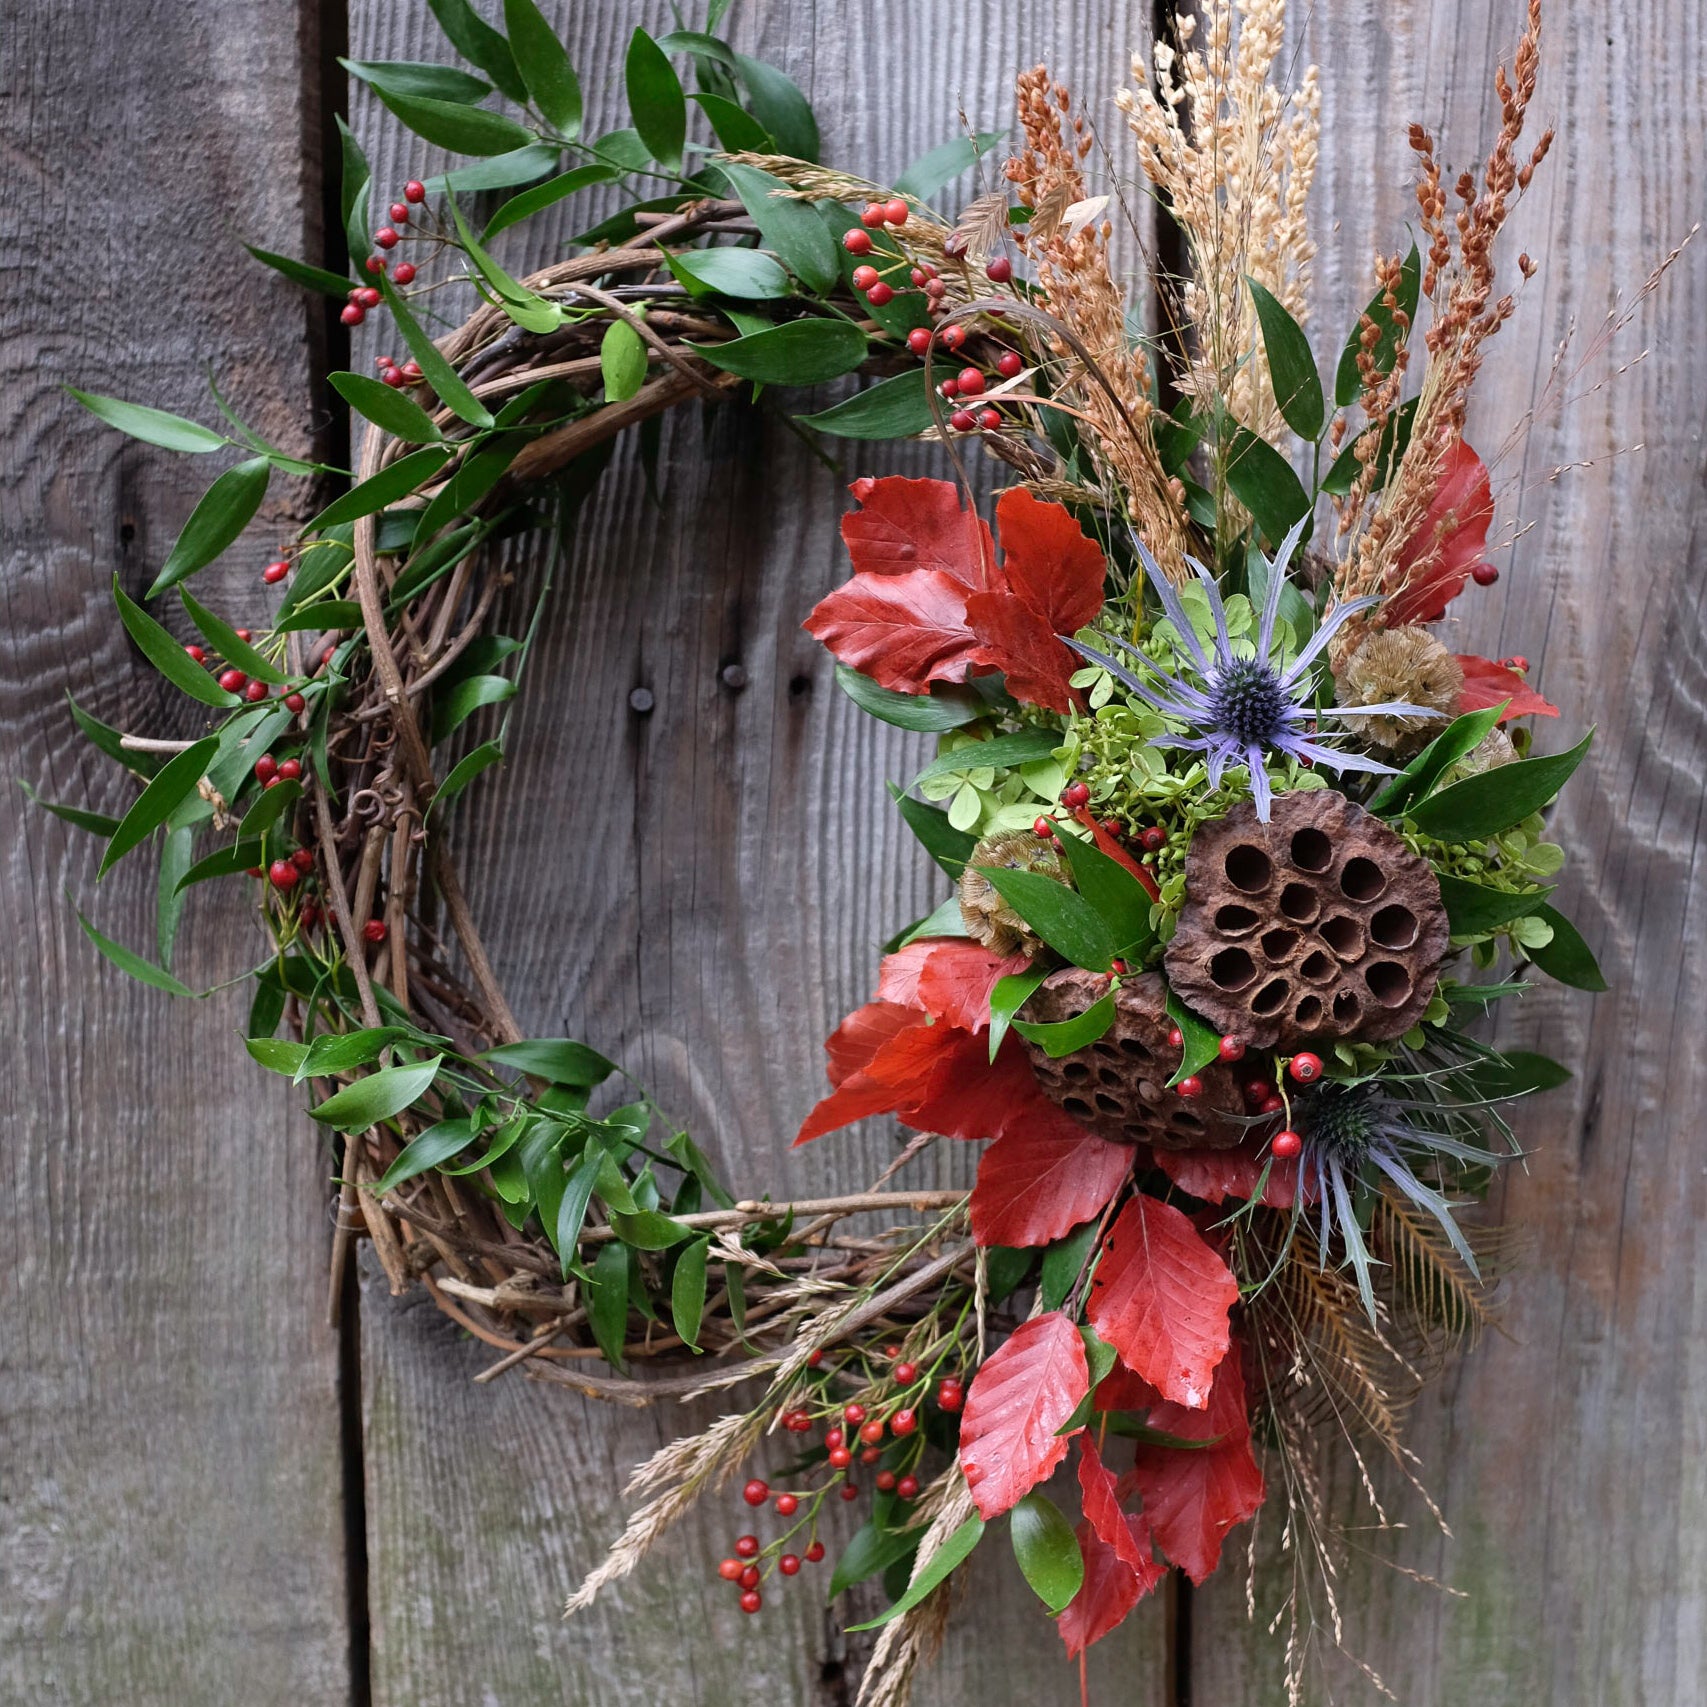 Fall Wreath by Michler Florist.